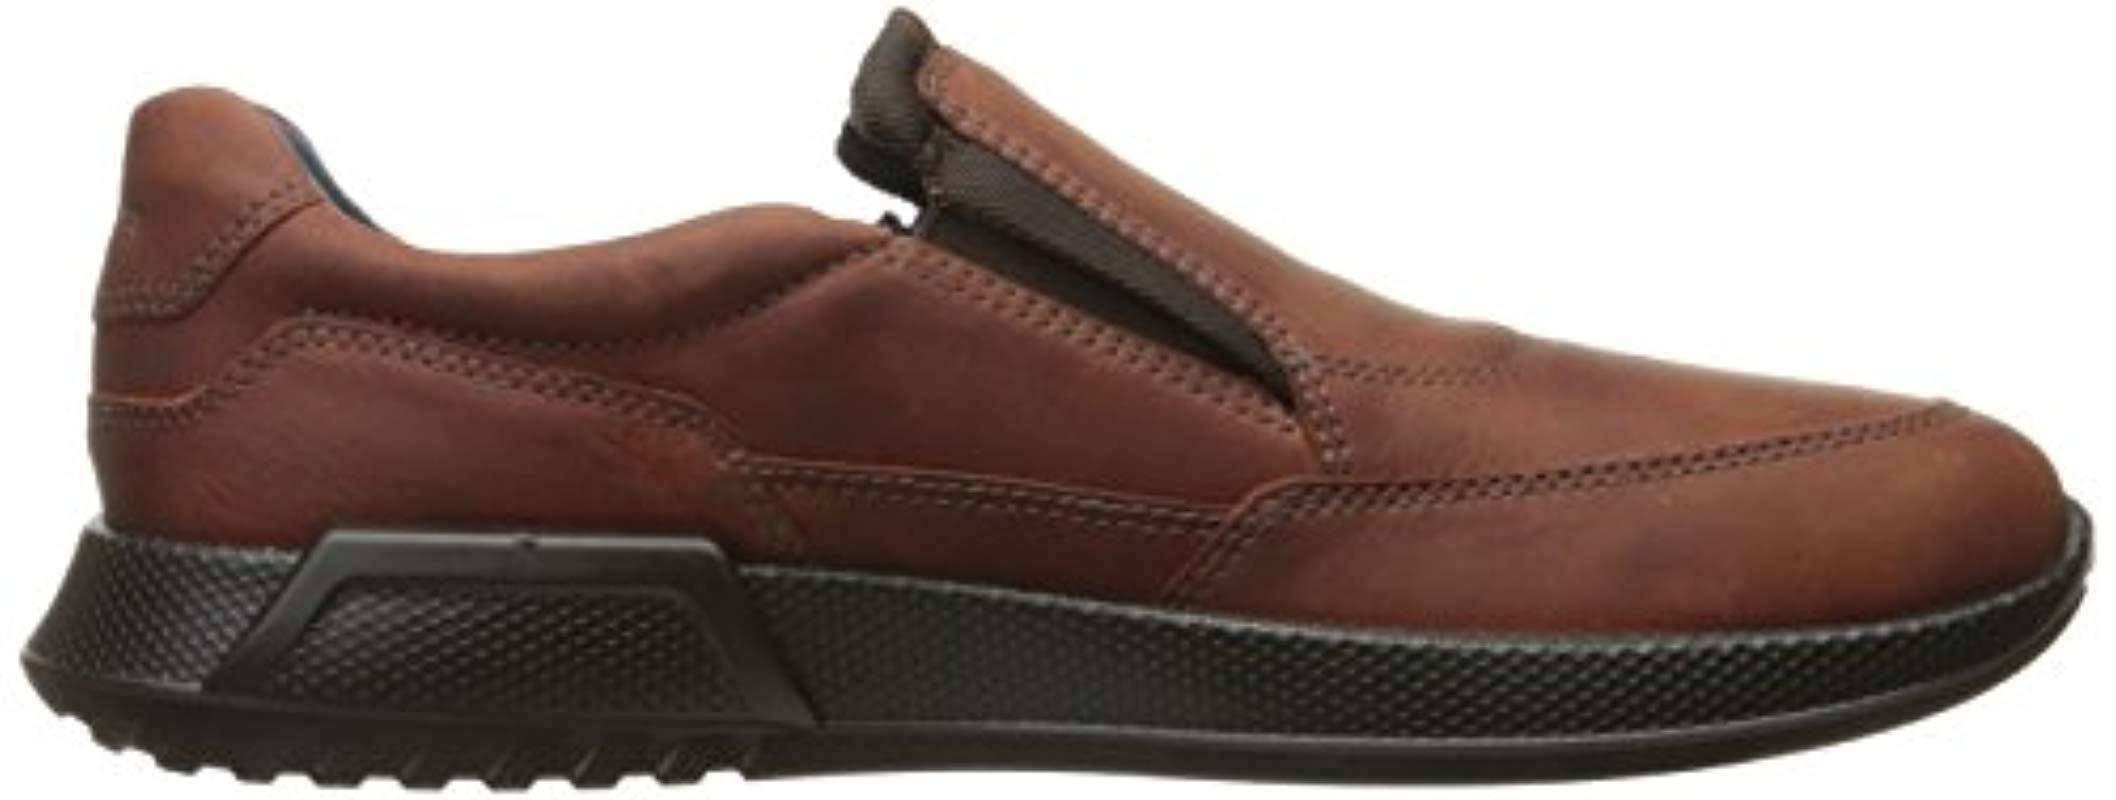 Ecco Leather Luca Slip On Trainers in Cognac (Brown) for Men - Lyst